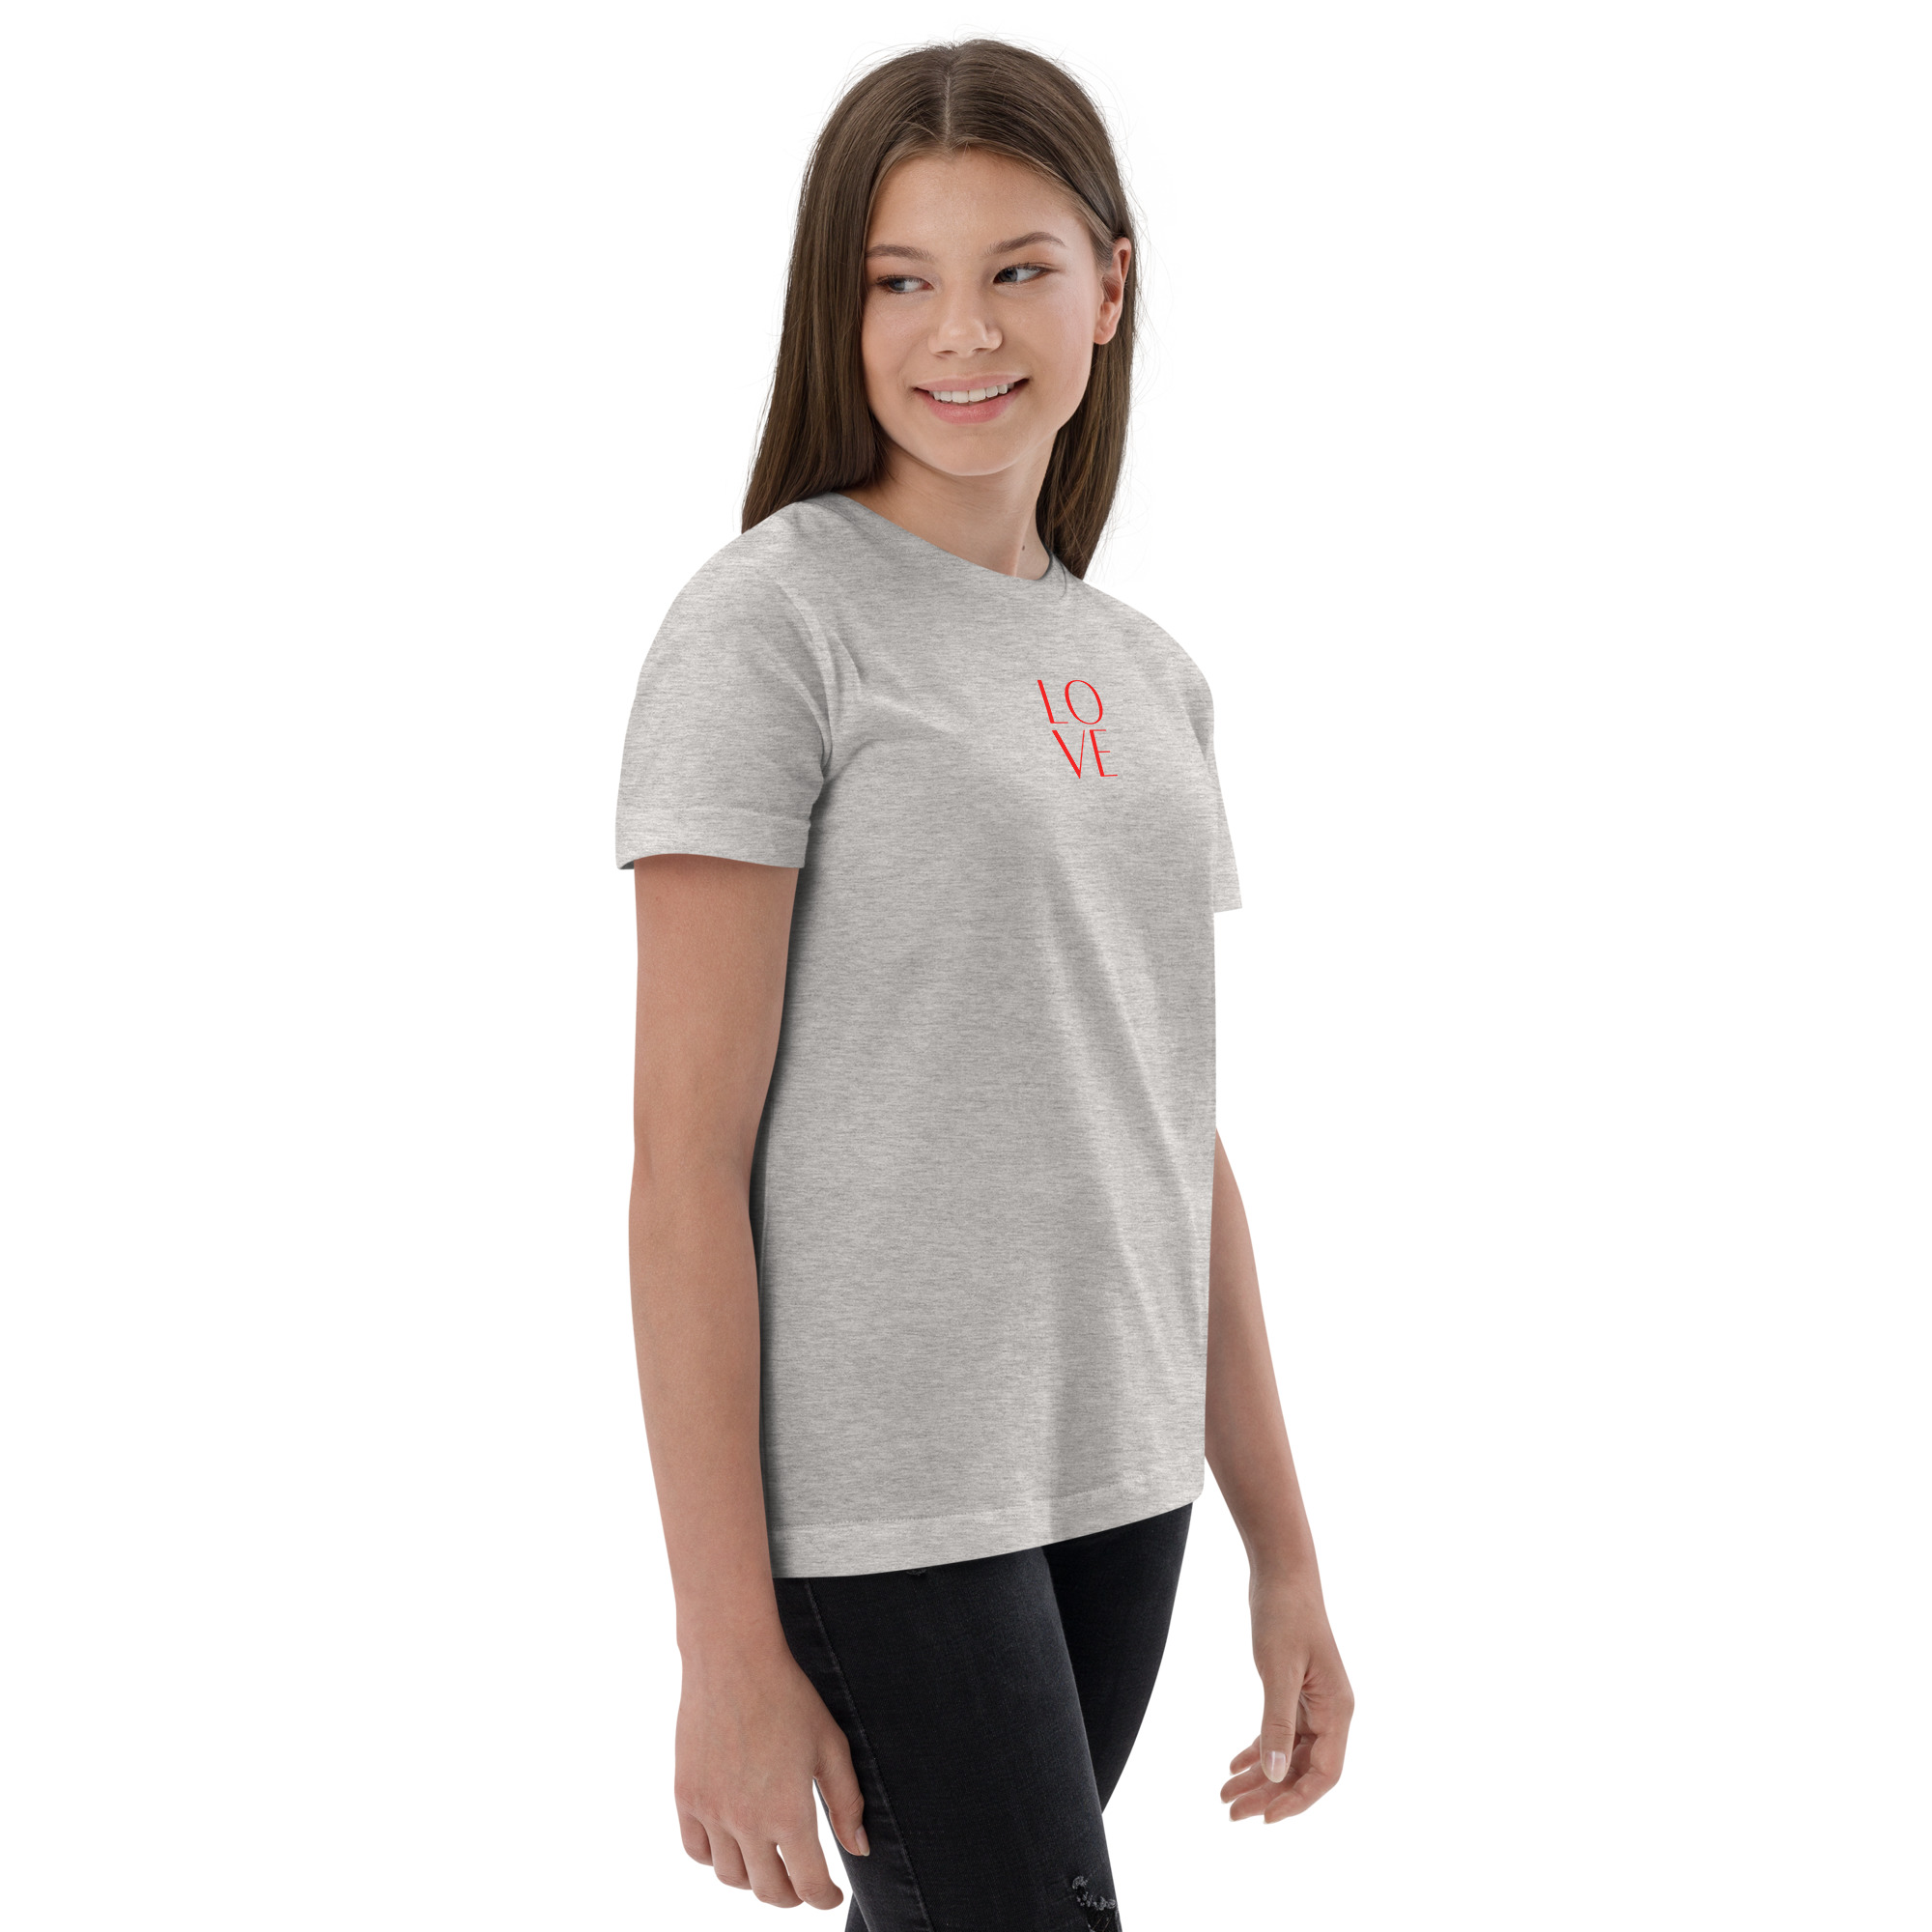 youth-jersey-t-shirt-heather-right-front-6384cb2a1d89f.jpg